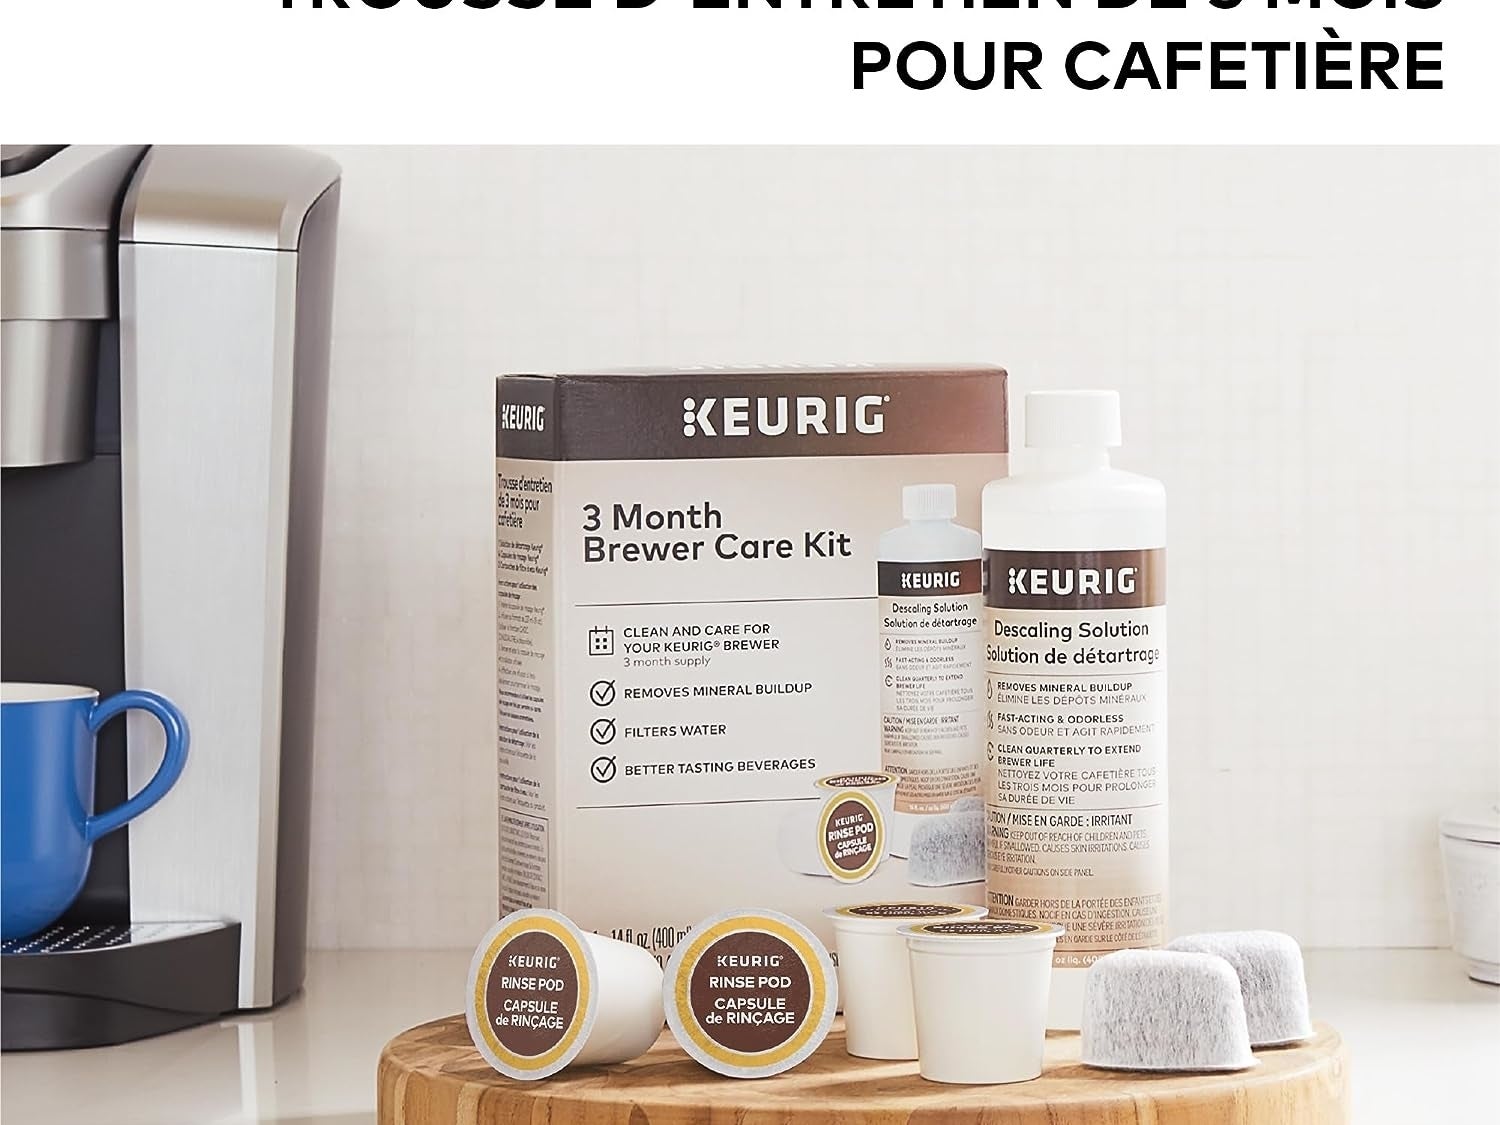 Descaling kit on a wooden board next to a Keurig